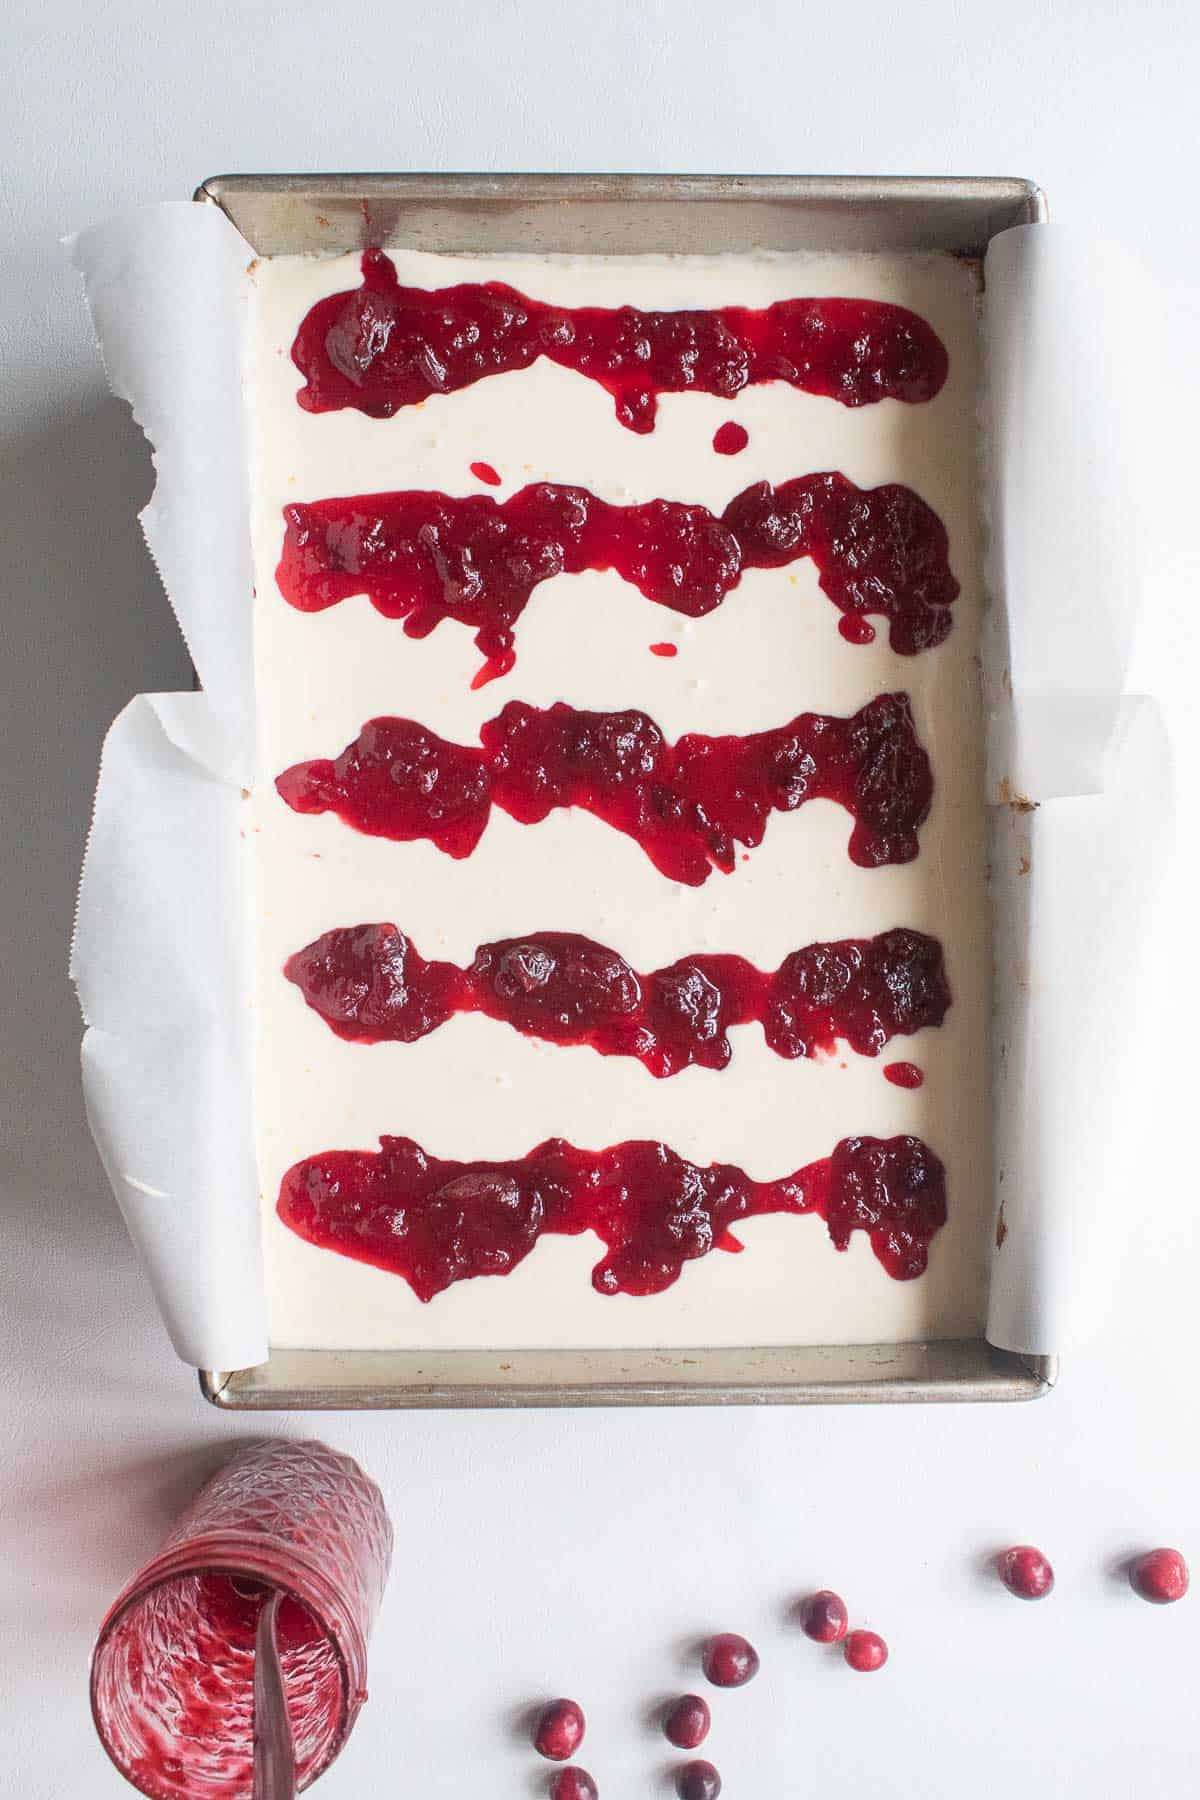 Rows of oramge cranberry jam spooned over the cheesecake filling to swirl for a marbled effect.